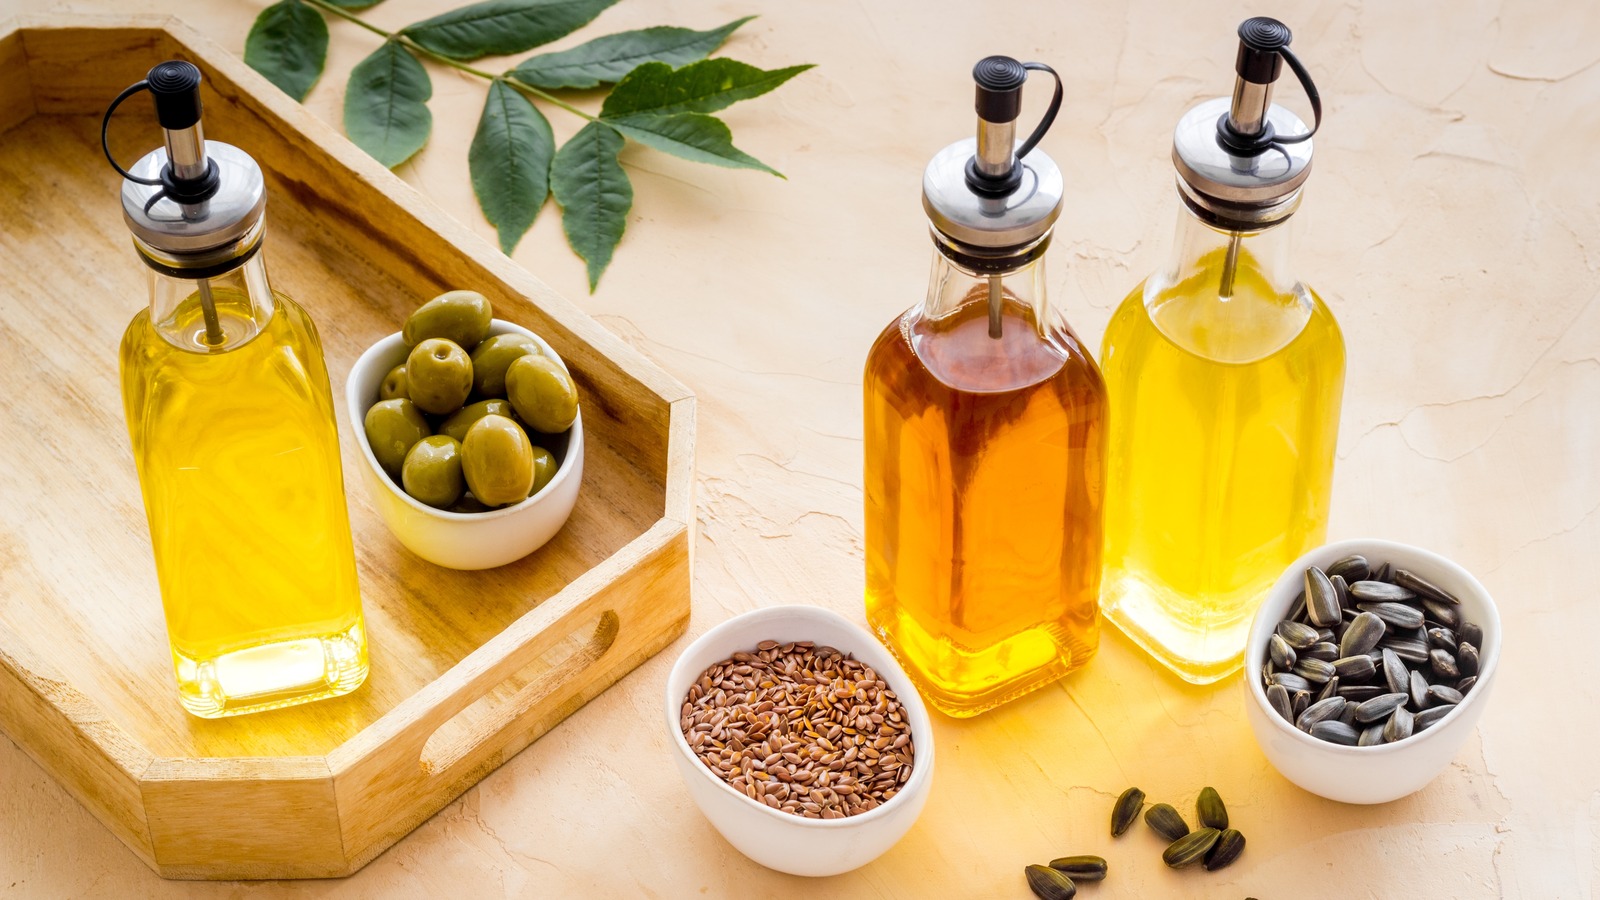 Raw linseed oil, Vegetable oils